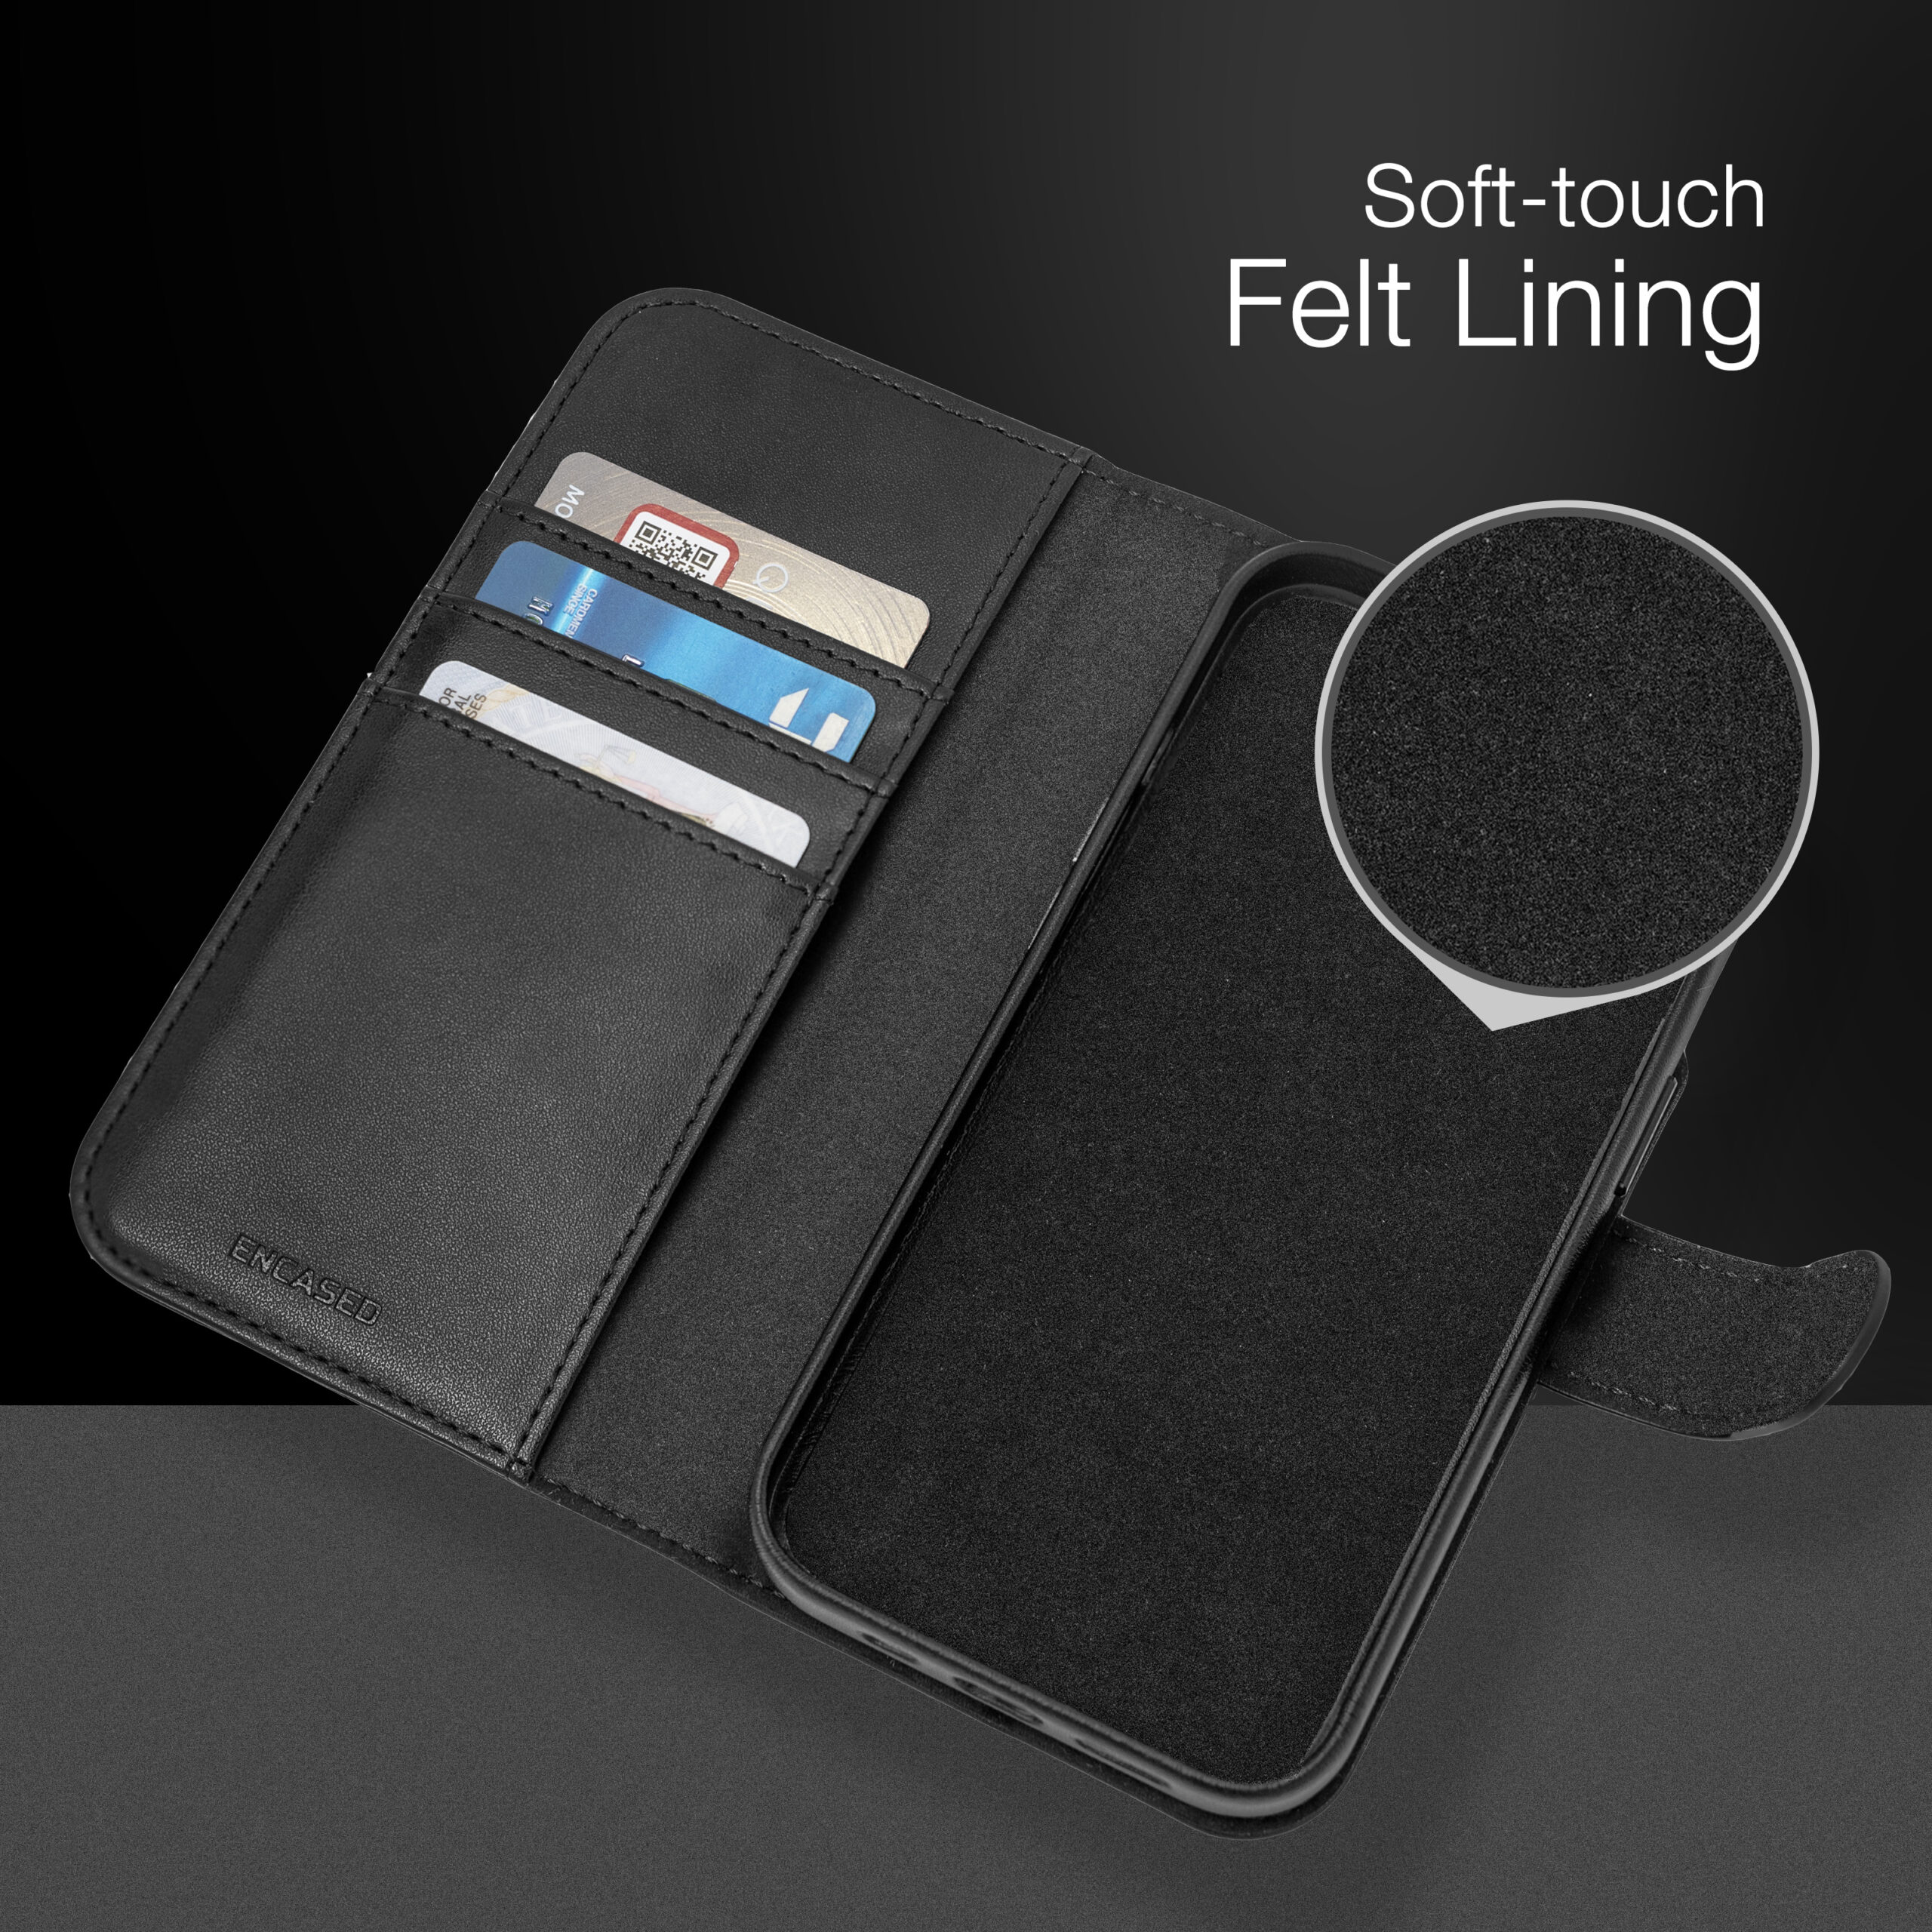 This pebbled leather phone case is 40 percent off for one more day